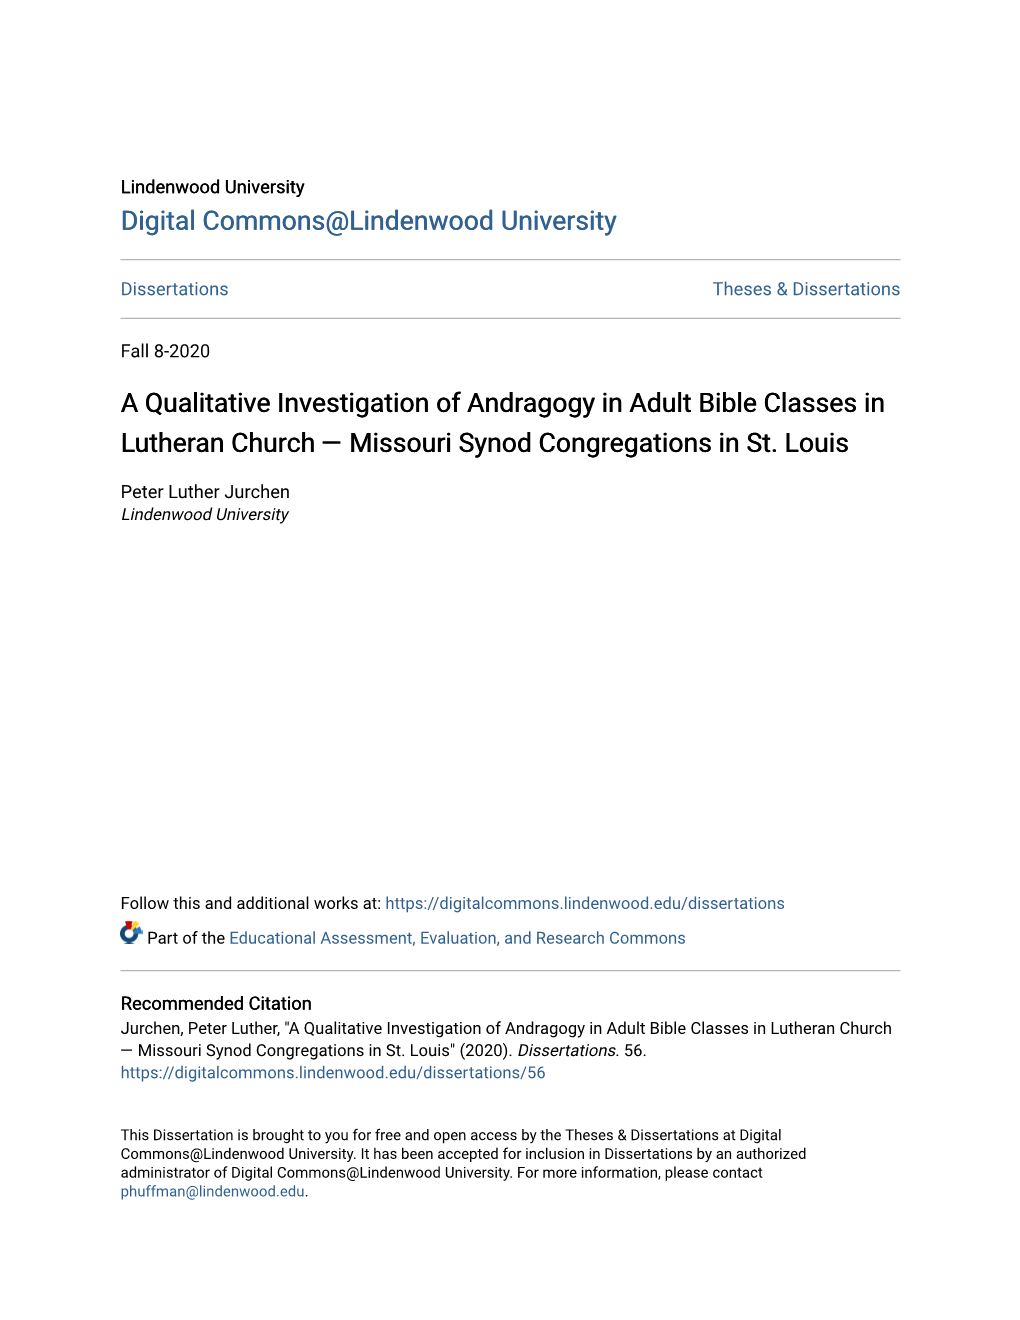 A Qualitative Investigation of Andragogy in Adult Bible Classes in Lutheran Church — Missouri Synod Congregations in St